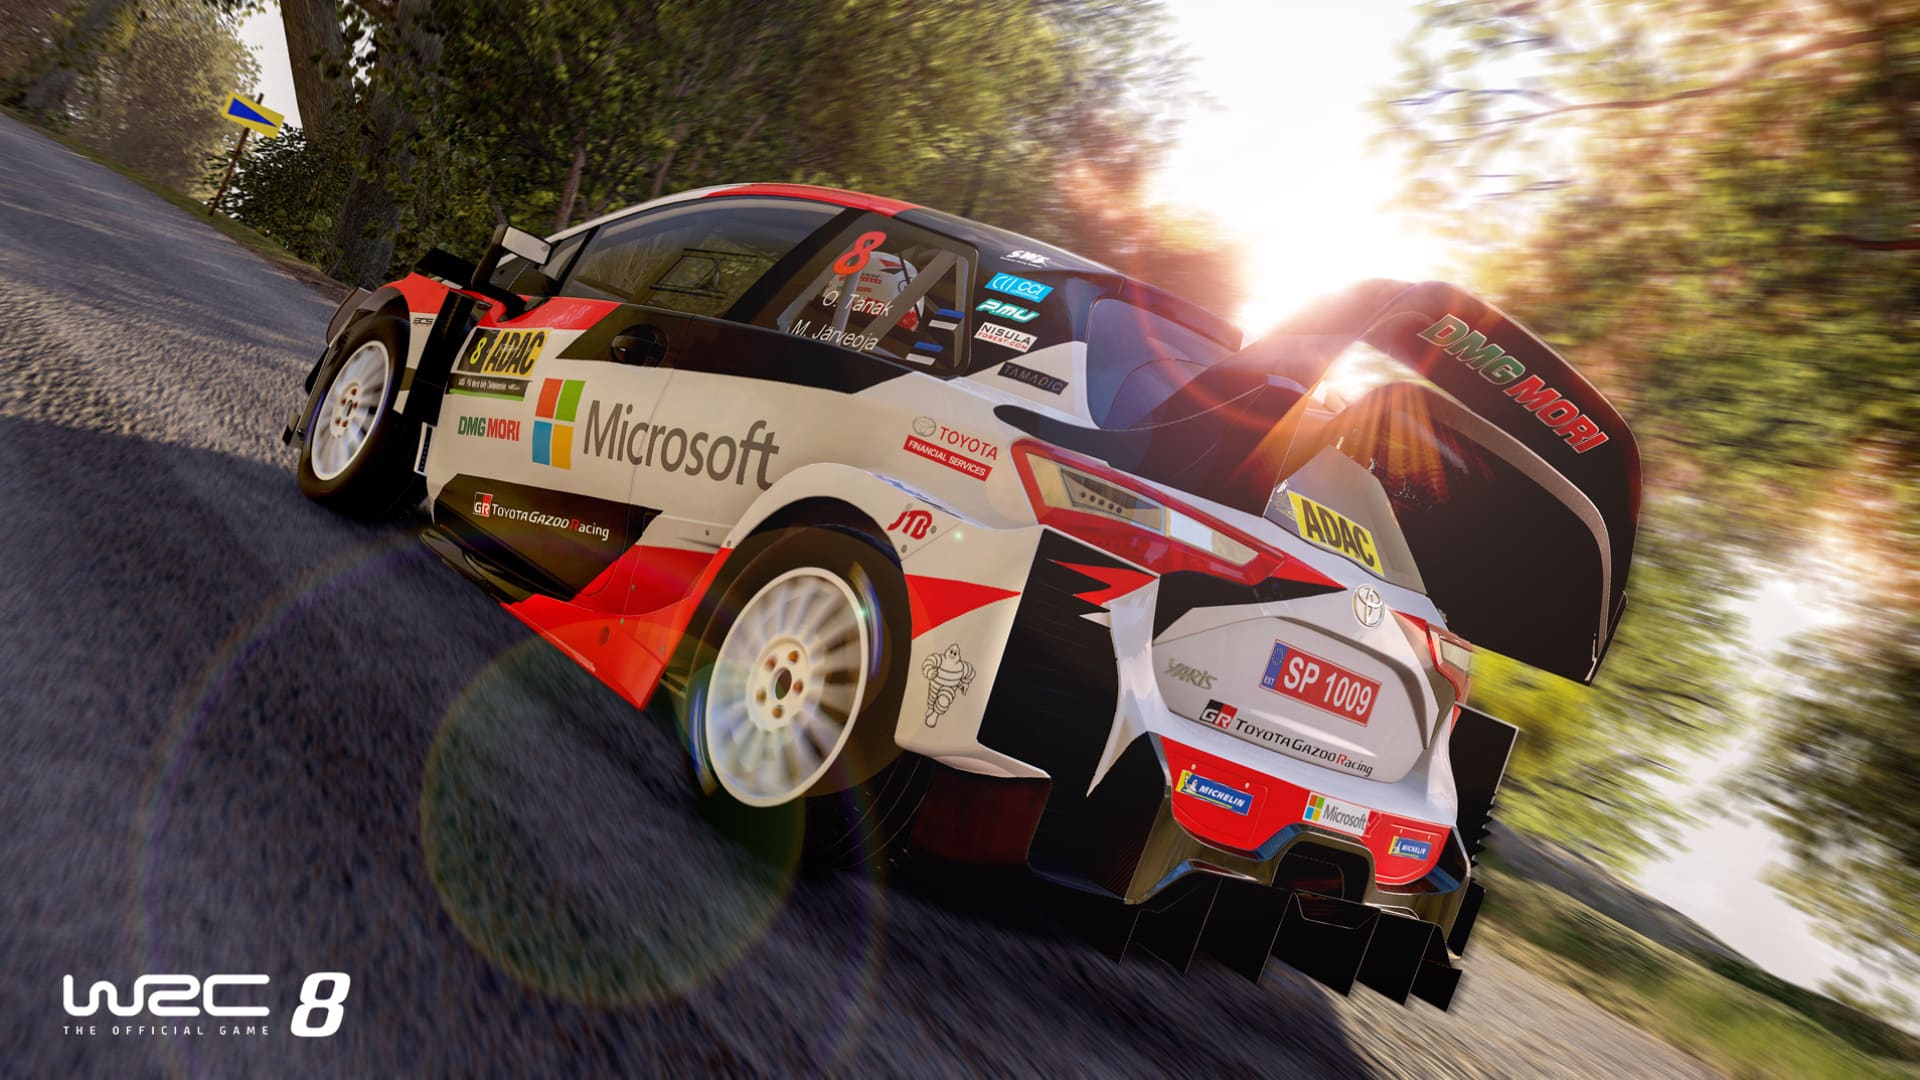 download free wrc 8 game